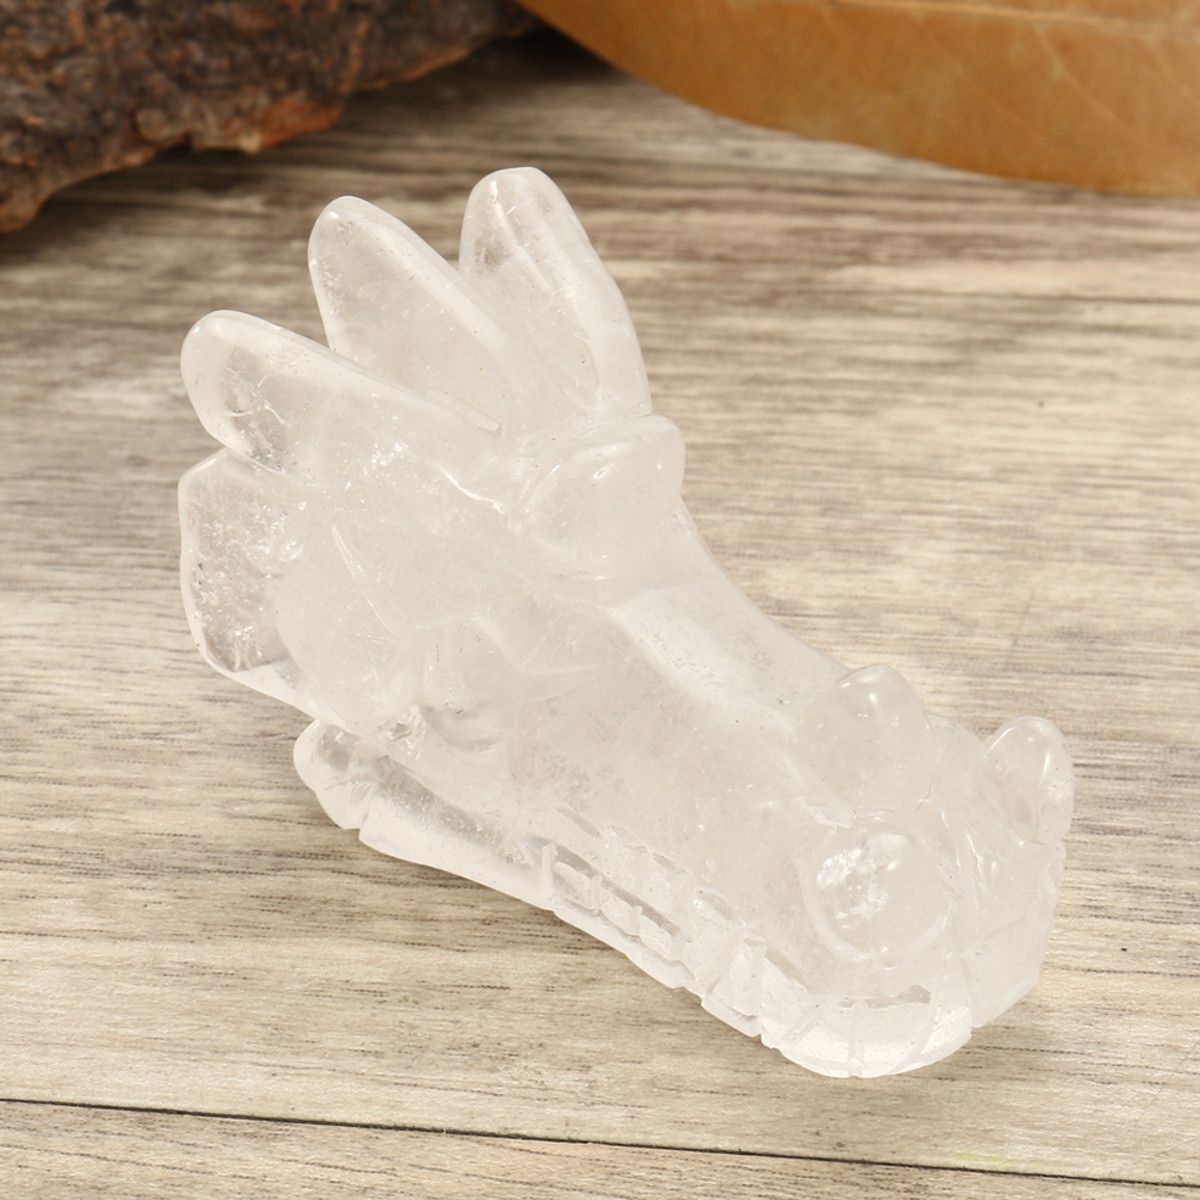 Hand-Carved-Crystal-4-Colors-Dragon-Skull-Specimens-Healing-Wand-Gemstones-Gift-Home-Decorations-1471012